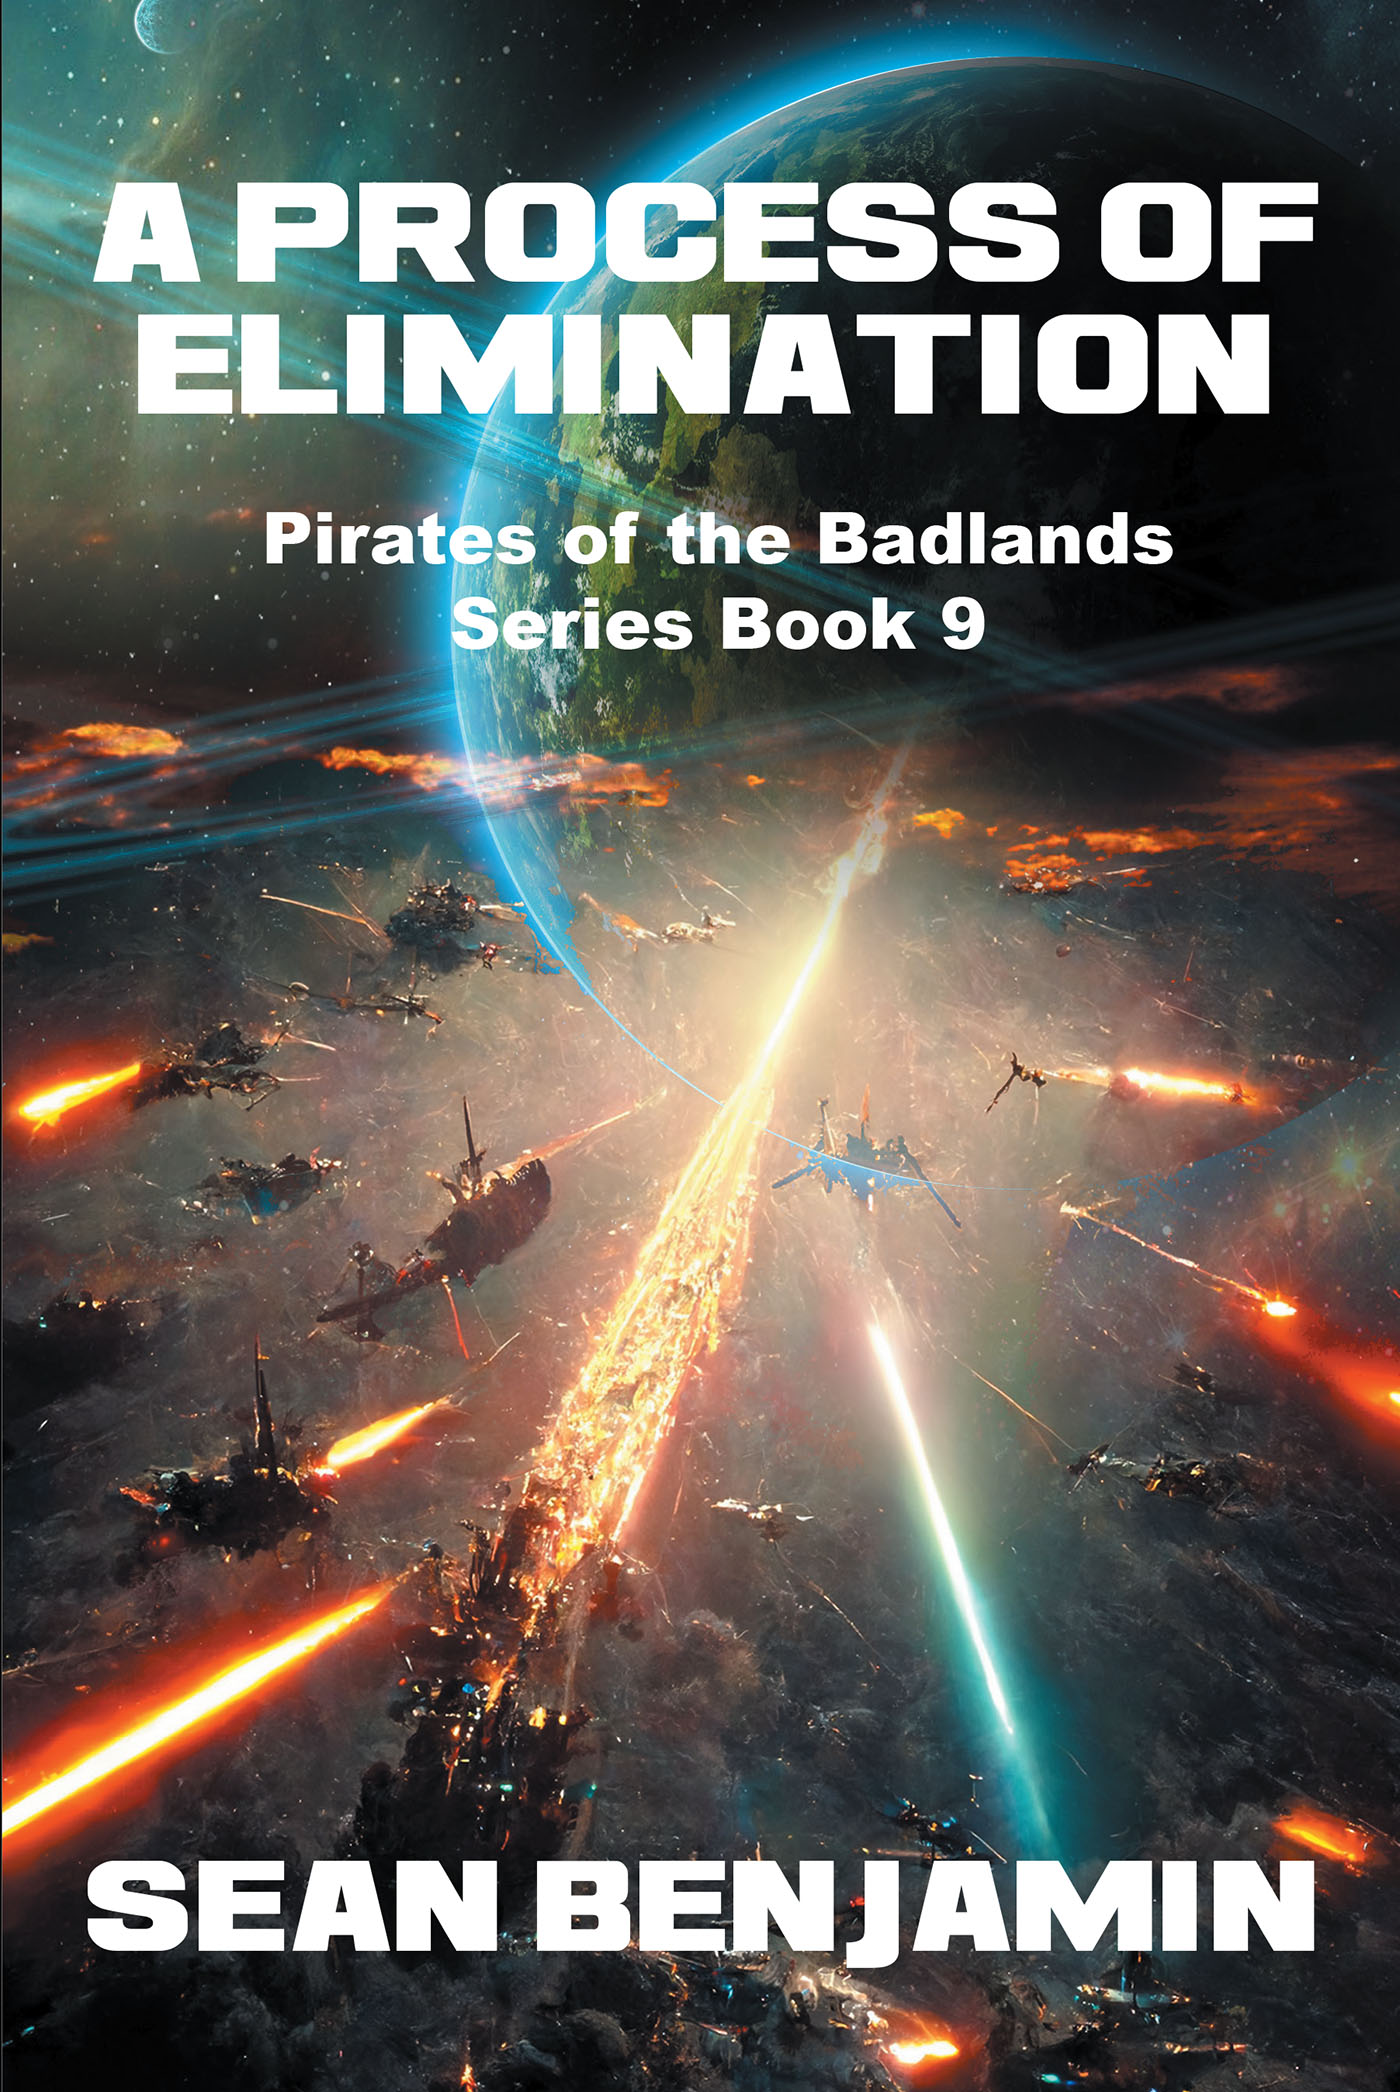 Author Sean Benjamin’s New Book, “A Process of Elimination: Pirates of the Badlands Series,” Follows a Group of Pirates Who Must Band Together to Defeat a Shared Enemy